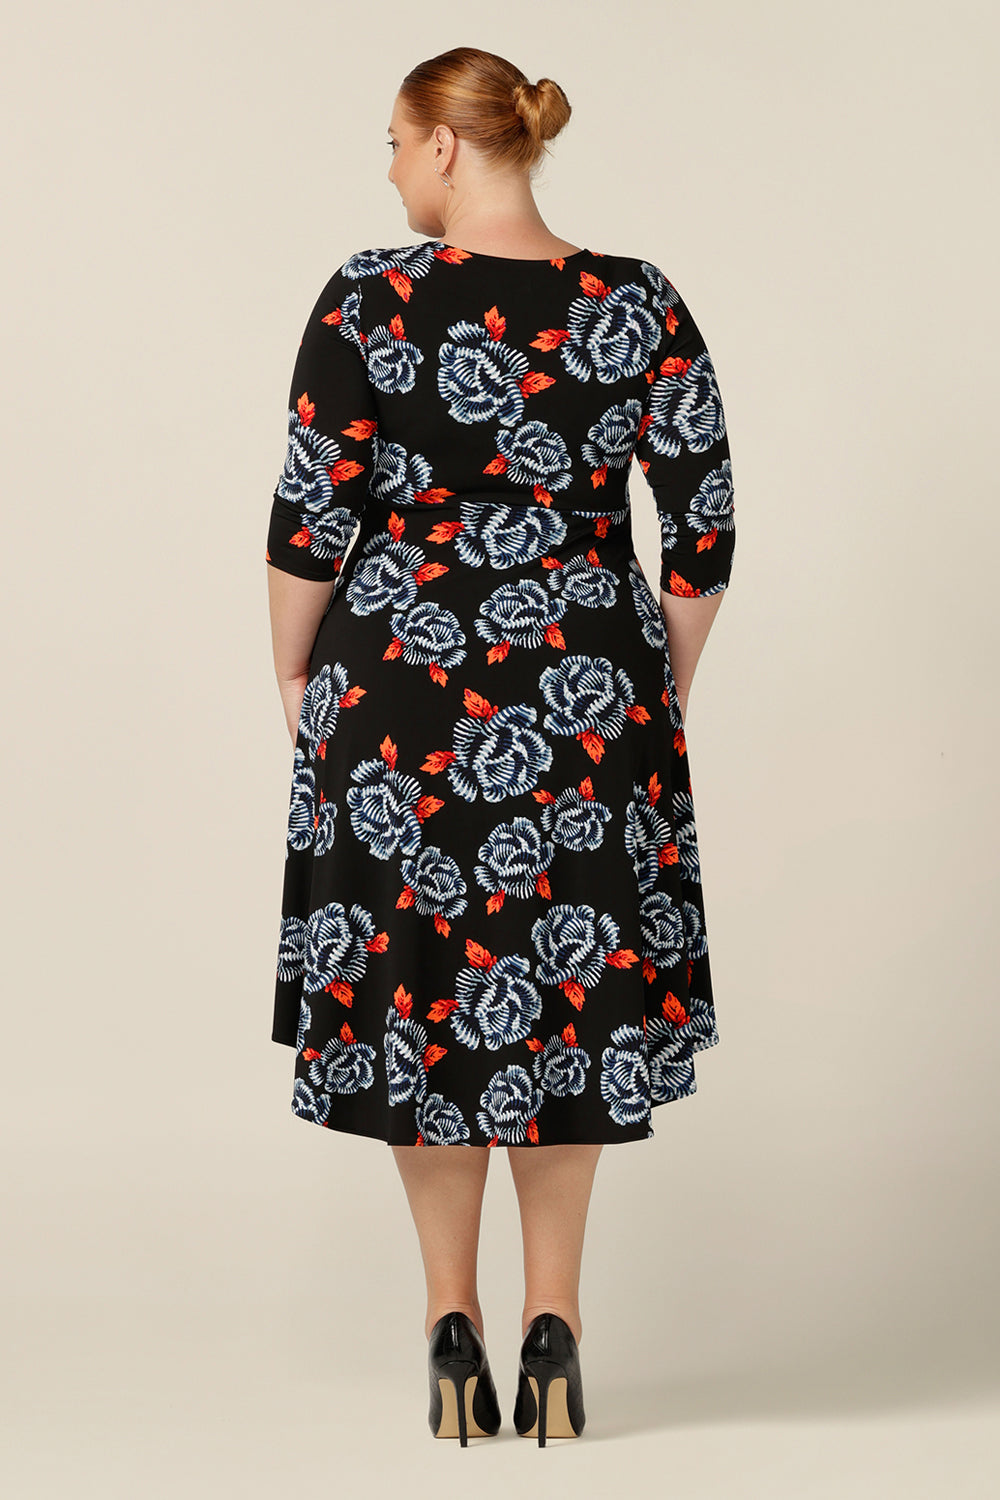 Back view of a size 18 fuller figure woman wears a blue and orange floral print jersey dress by Australian and New Zealand women's clothing brand, L&F. this empire line dress features a V-neckline with twist detail, 3/4 sleeves and a full below-the-knee-length skirt. Australian-made, shop L&F workwear dresses in sizes 8 to size 24.